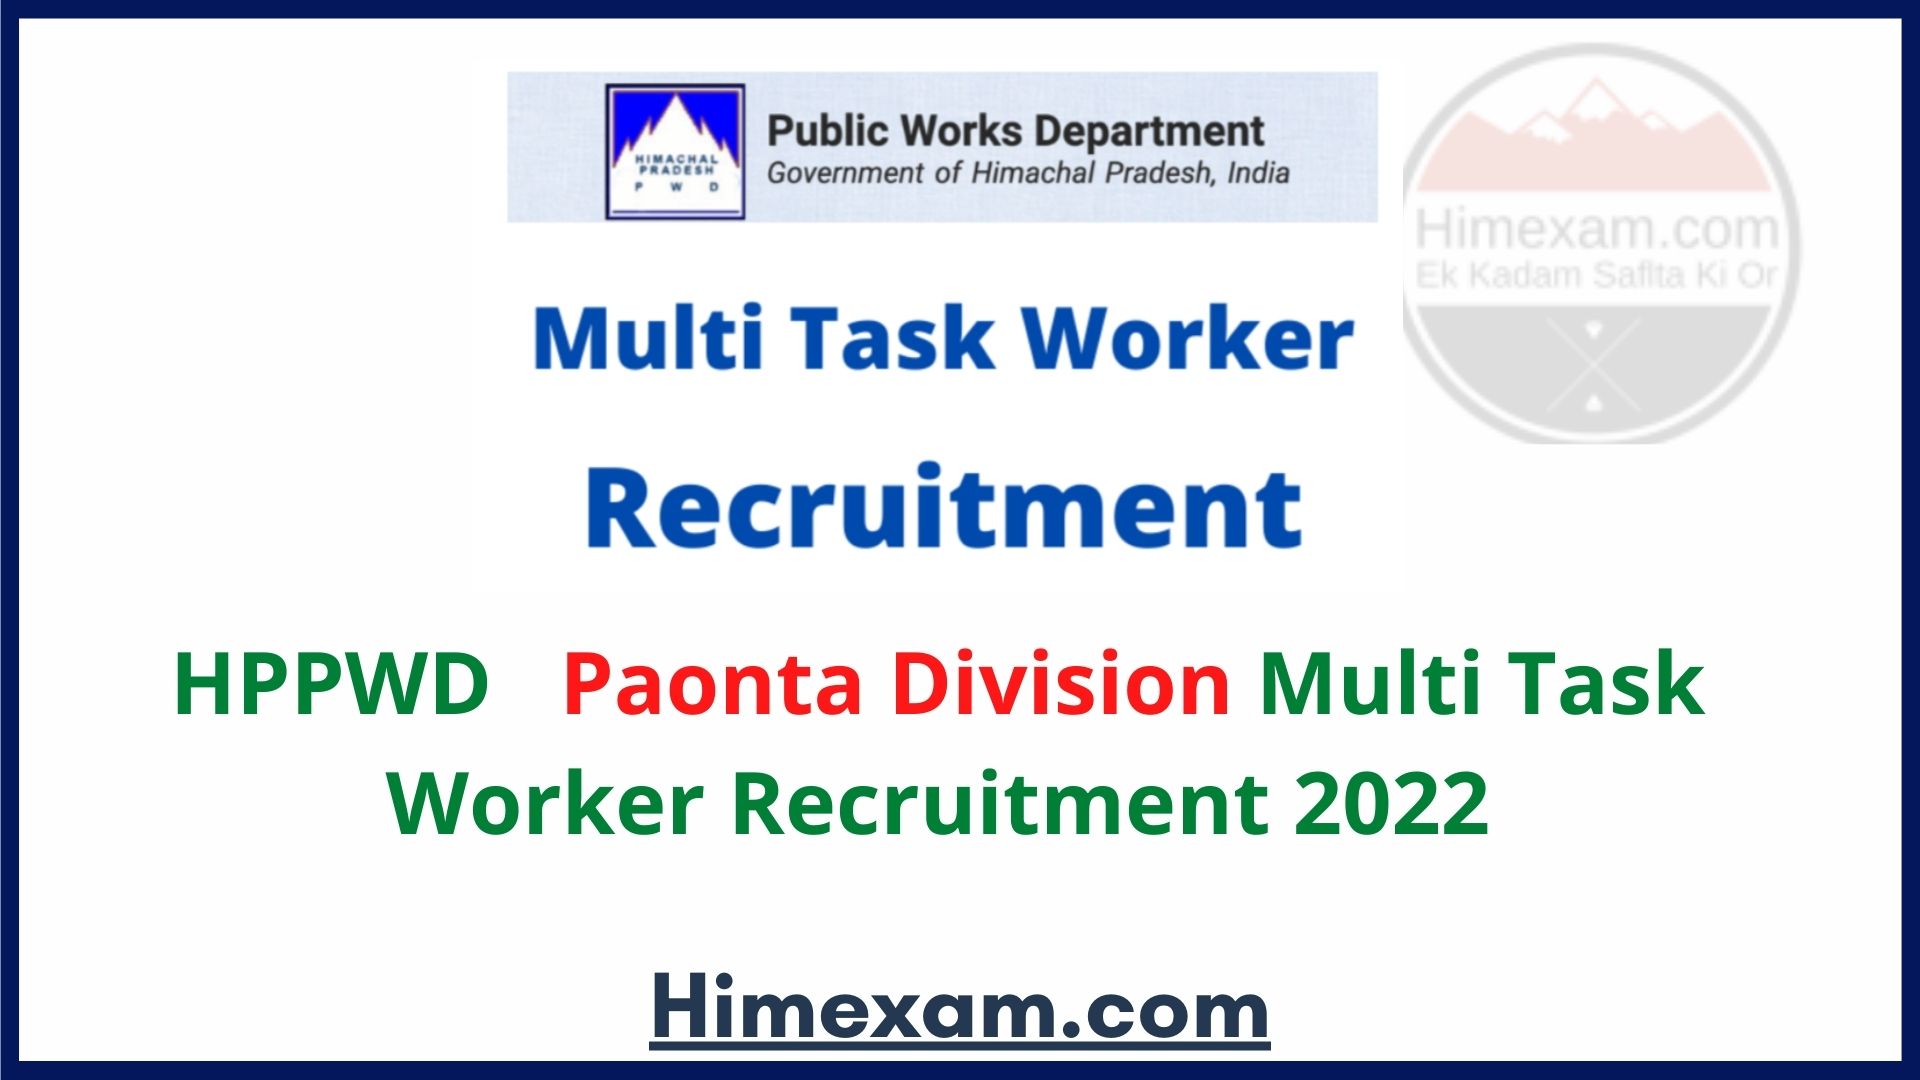 HPPWD Paonta Division Multi Task Worker Recruitment 2022